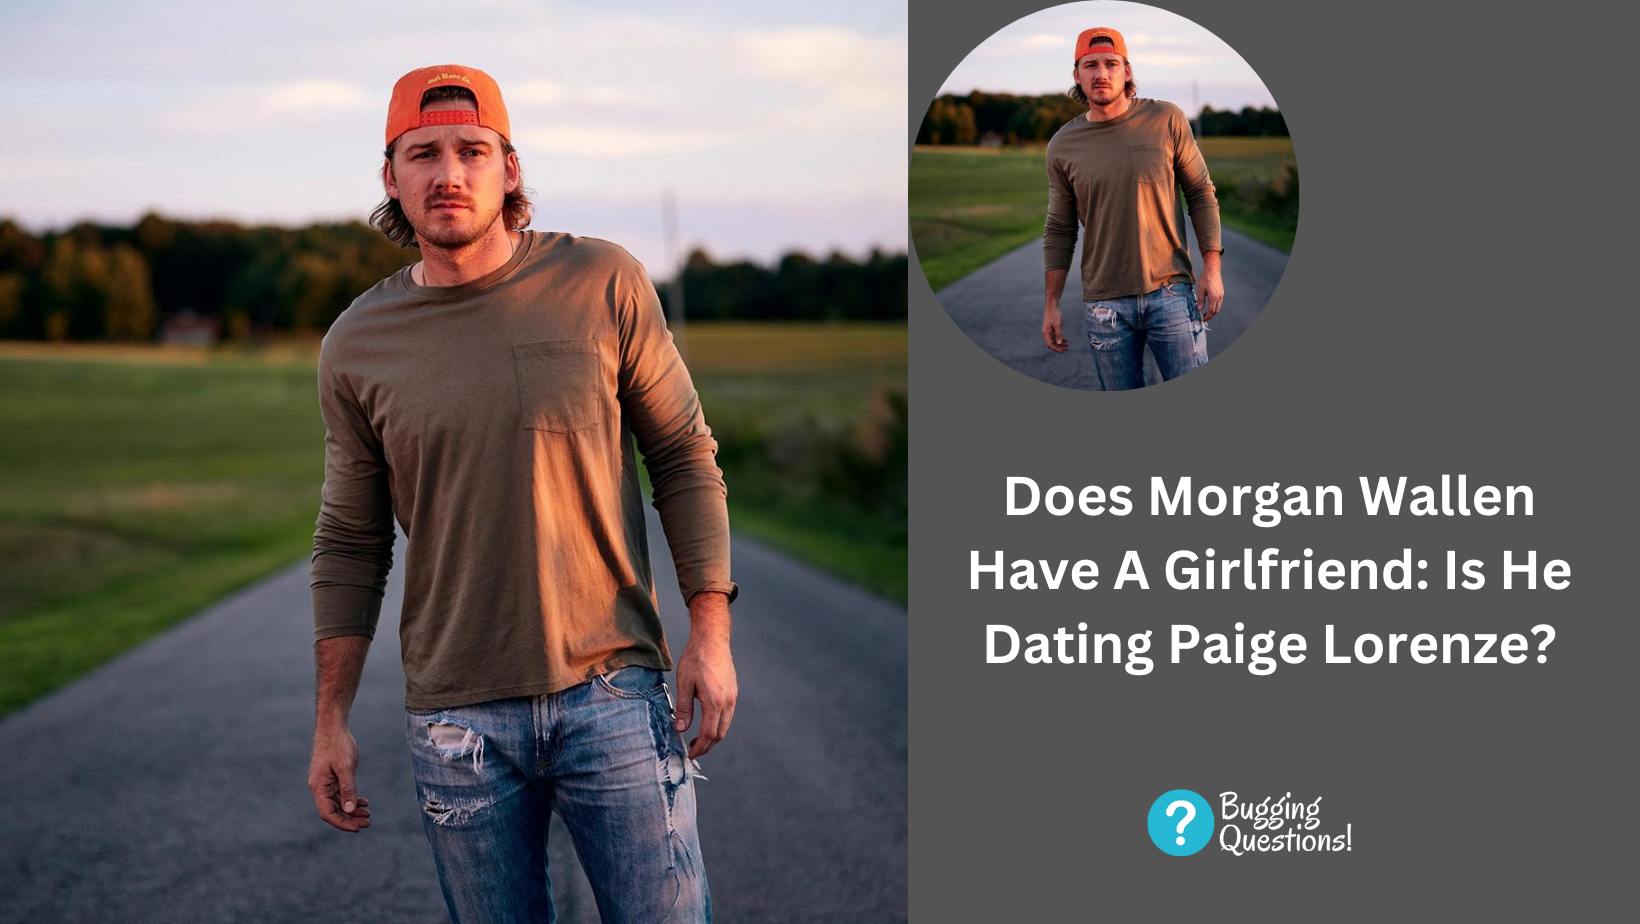 Does Morgan Wallen Have A Girlfriend: Is He Dating Paige Lorenze?